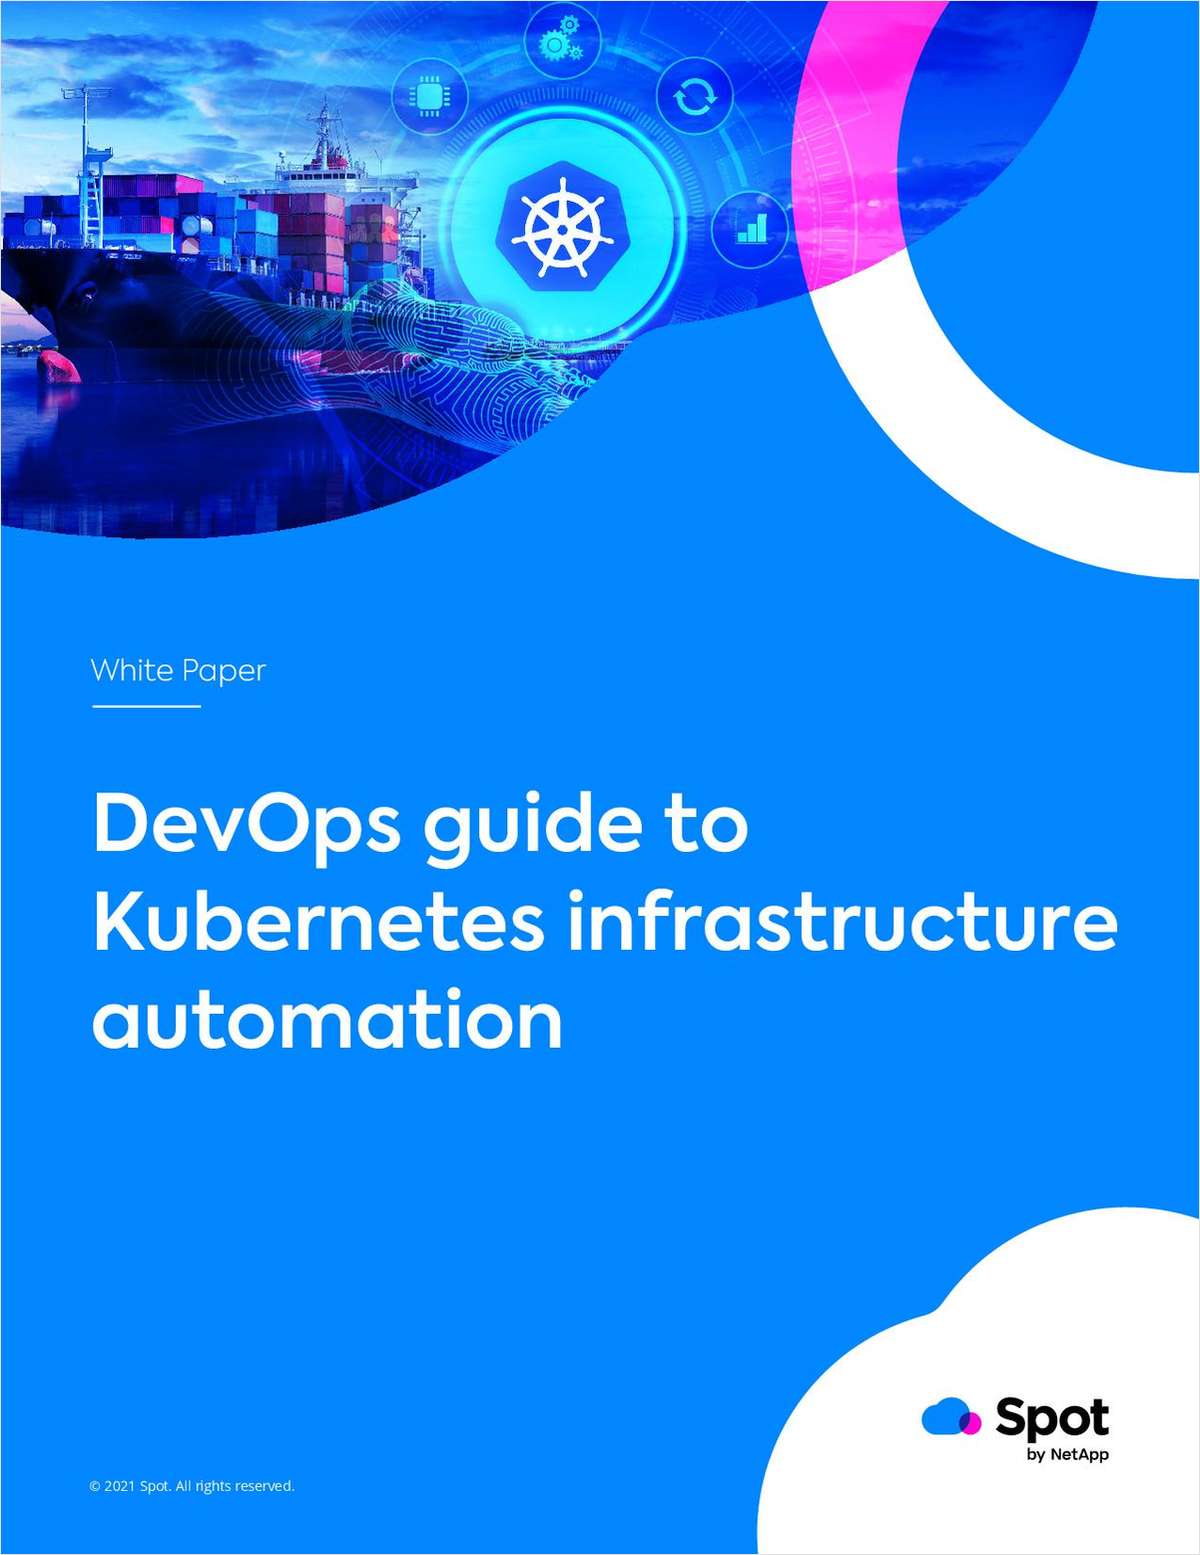 DevOps guide to Kubernetes infrastructure automation